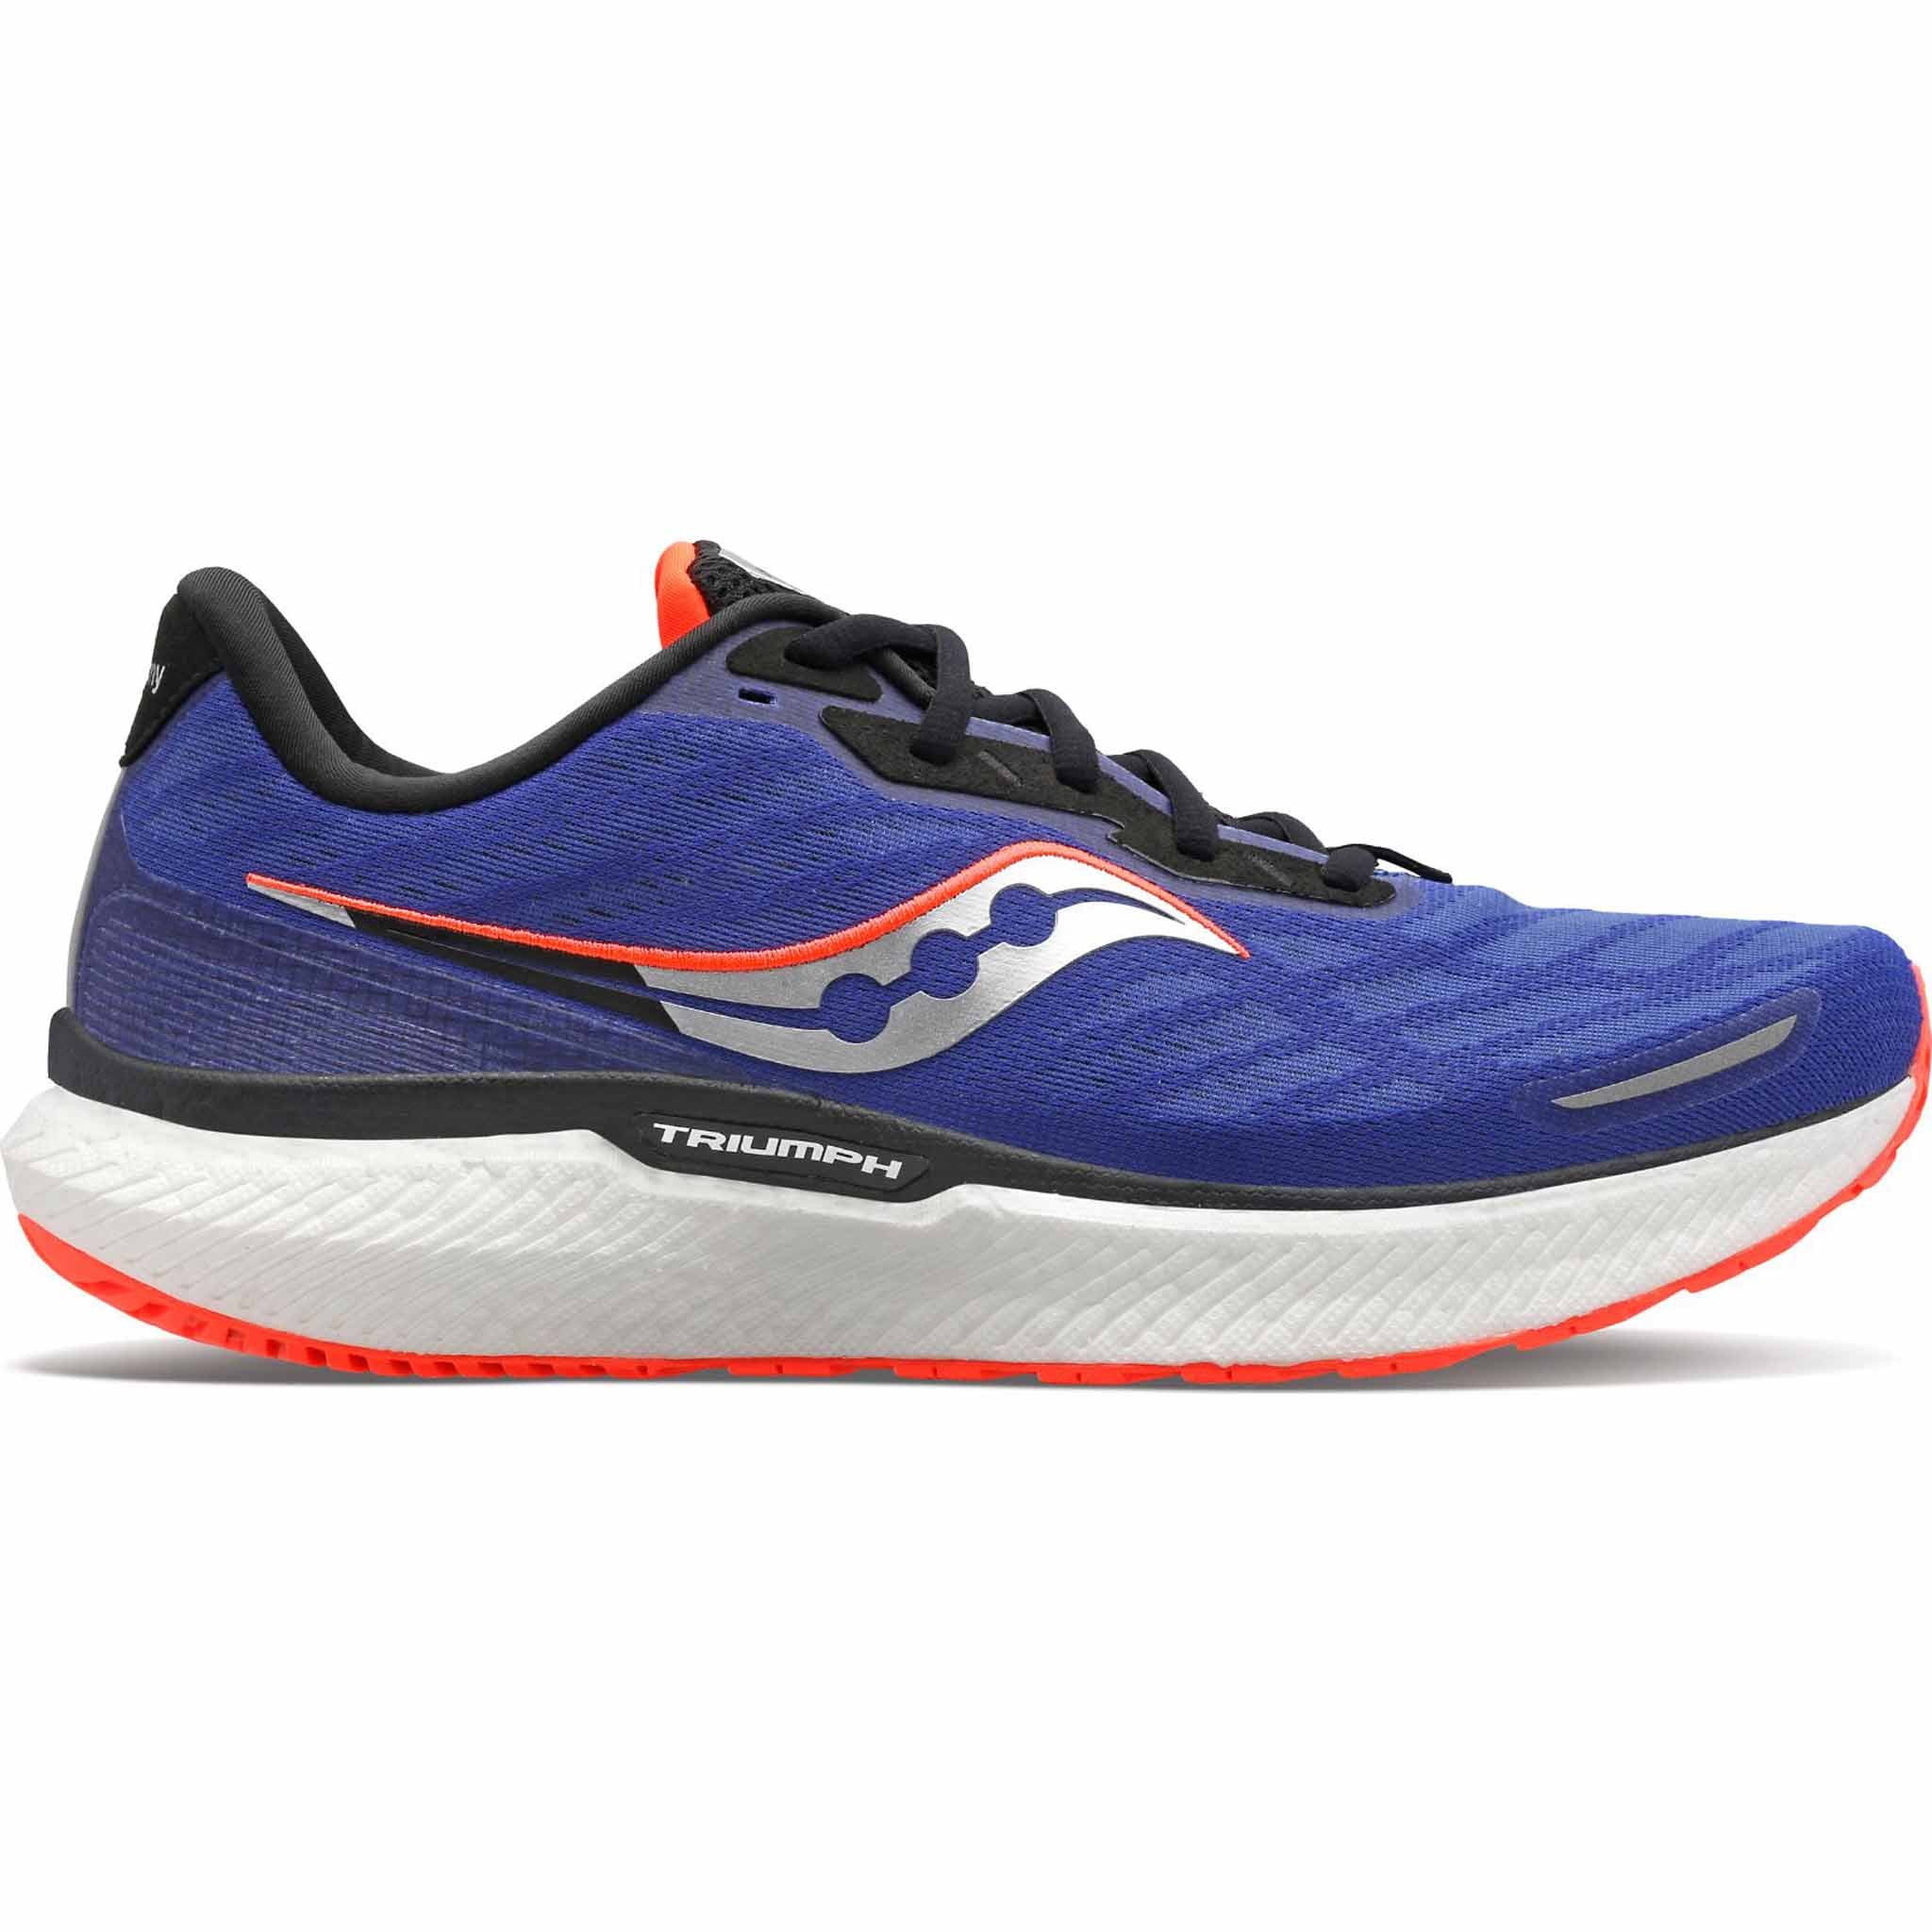 Saucony Triumph 19 running shoes for men – Soccer Sport Fitness